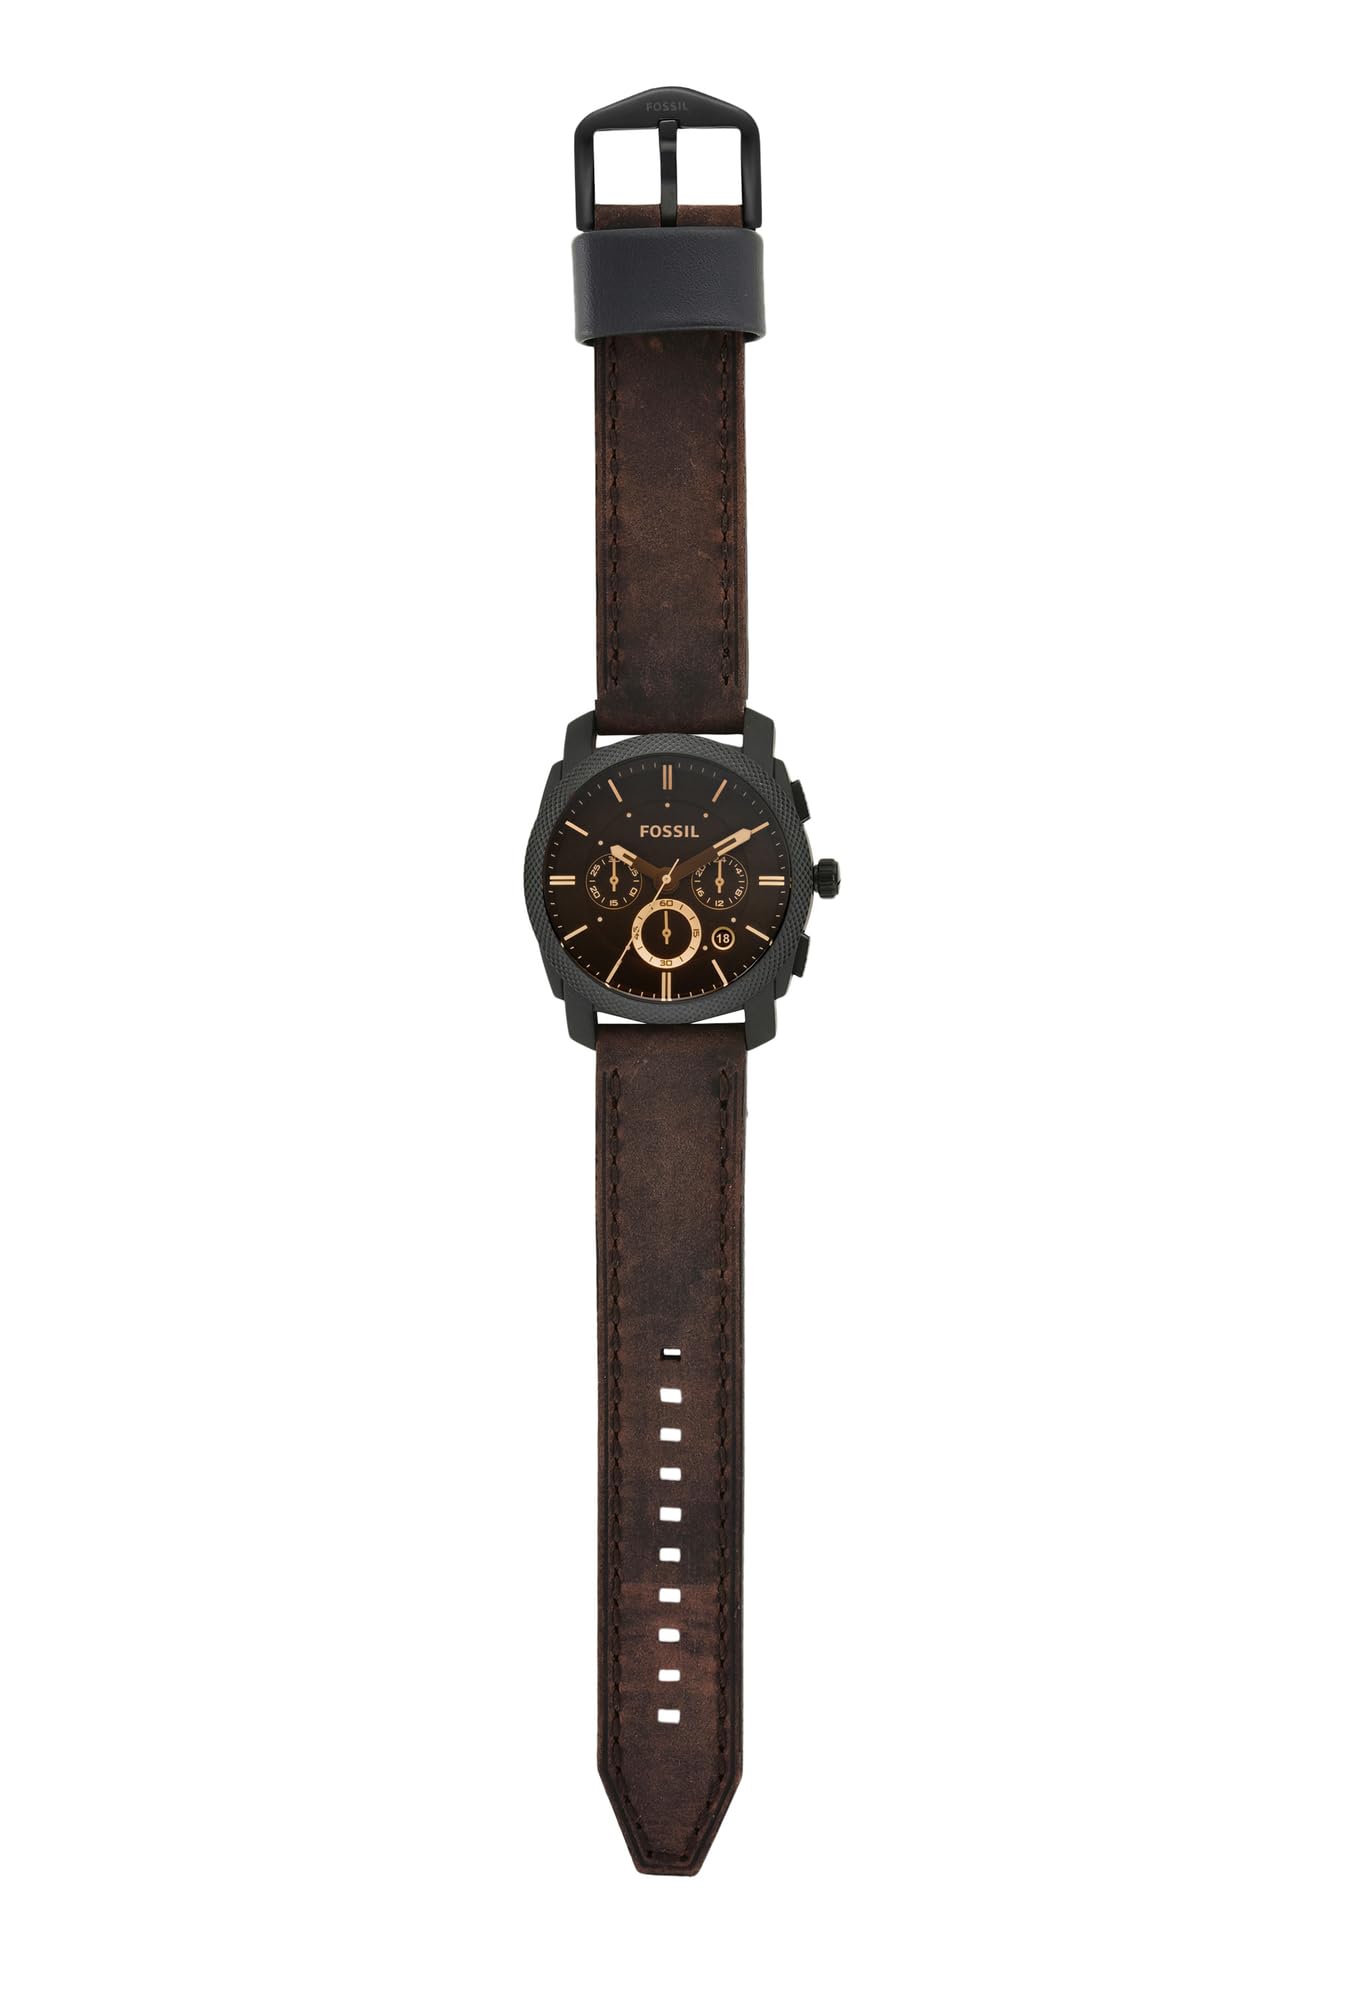 Fossil Men Leather Machine Analog Black Dial Watch-Fs4656, Band Color-Brown - Blossom Mantra